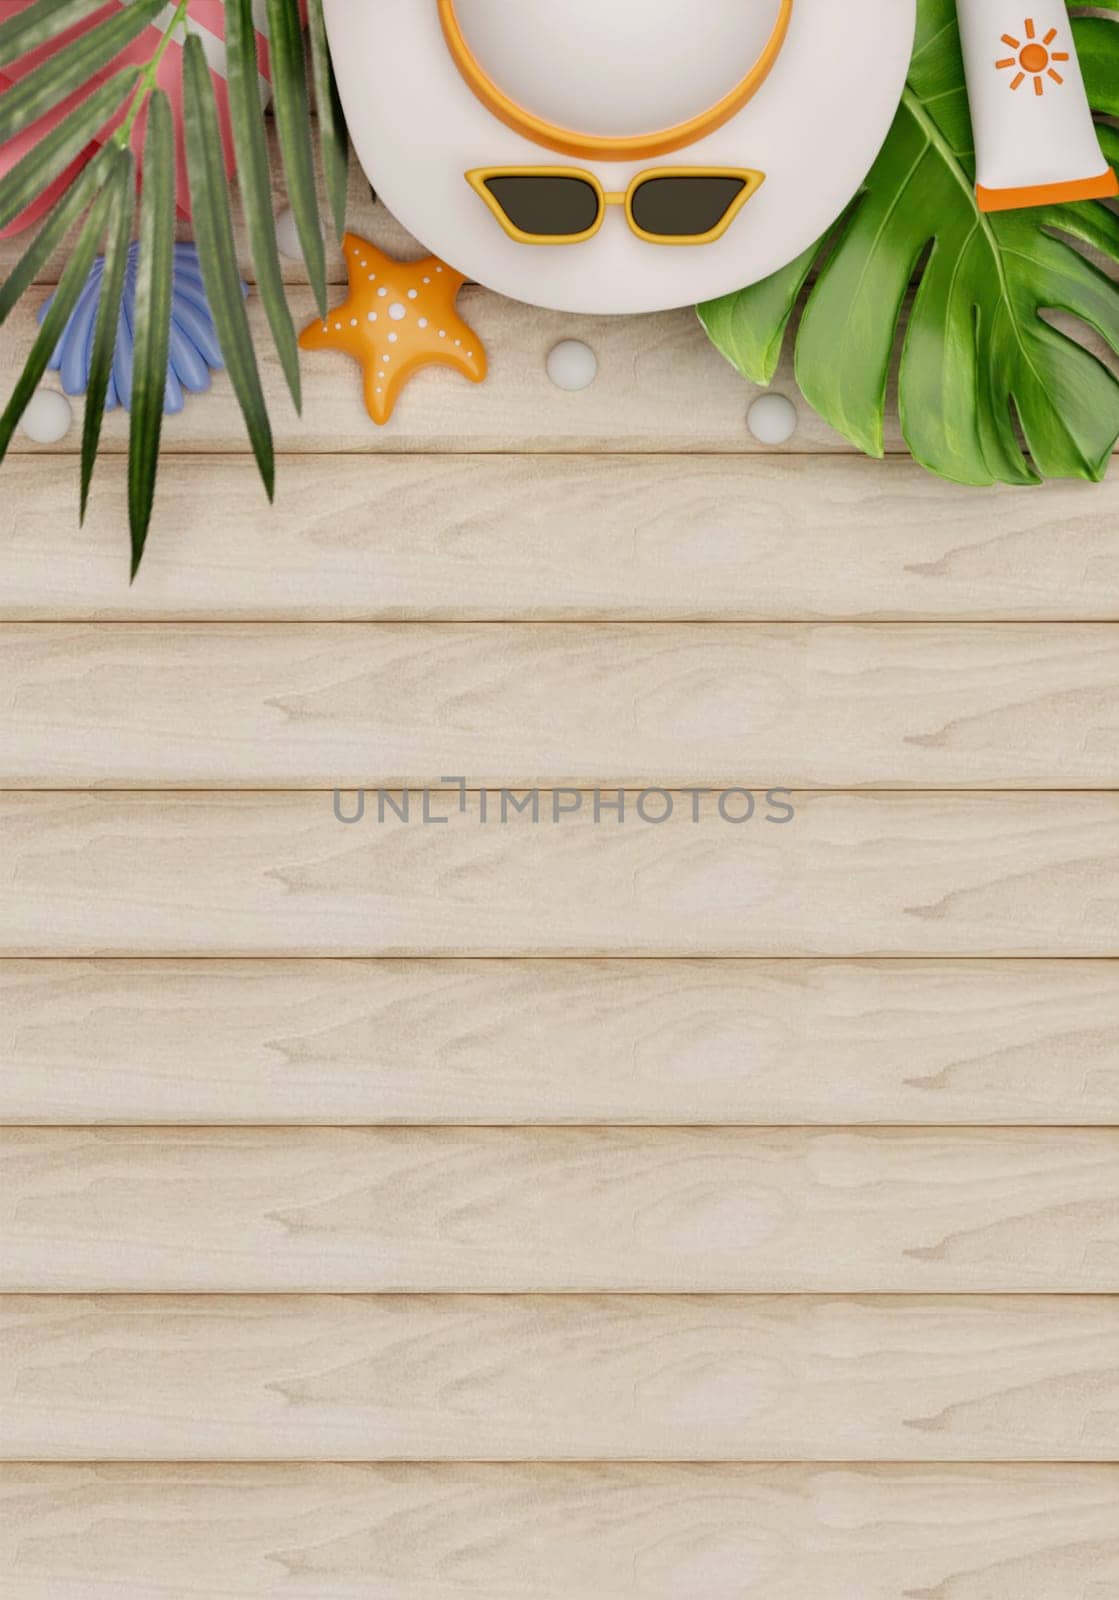 Swimming pool with pineapple in swimming ring, . Summer vacation vibes. Creative summer concept idea. 3d rendering illustration..